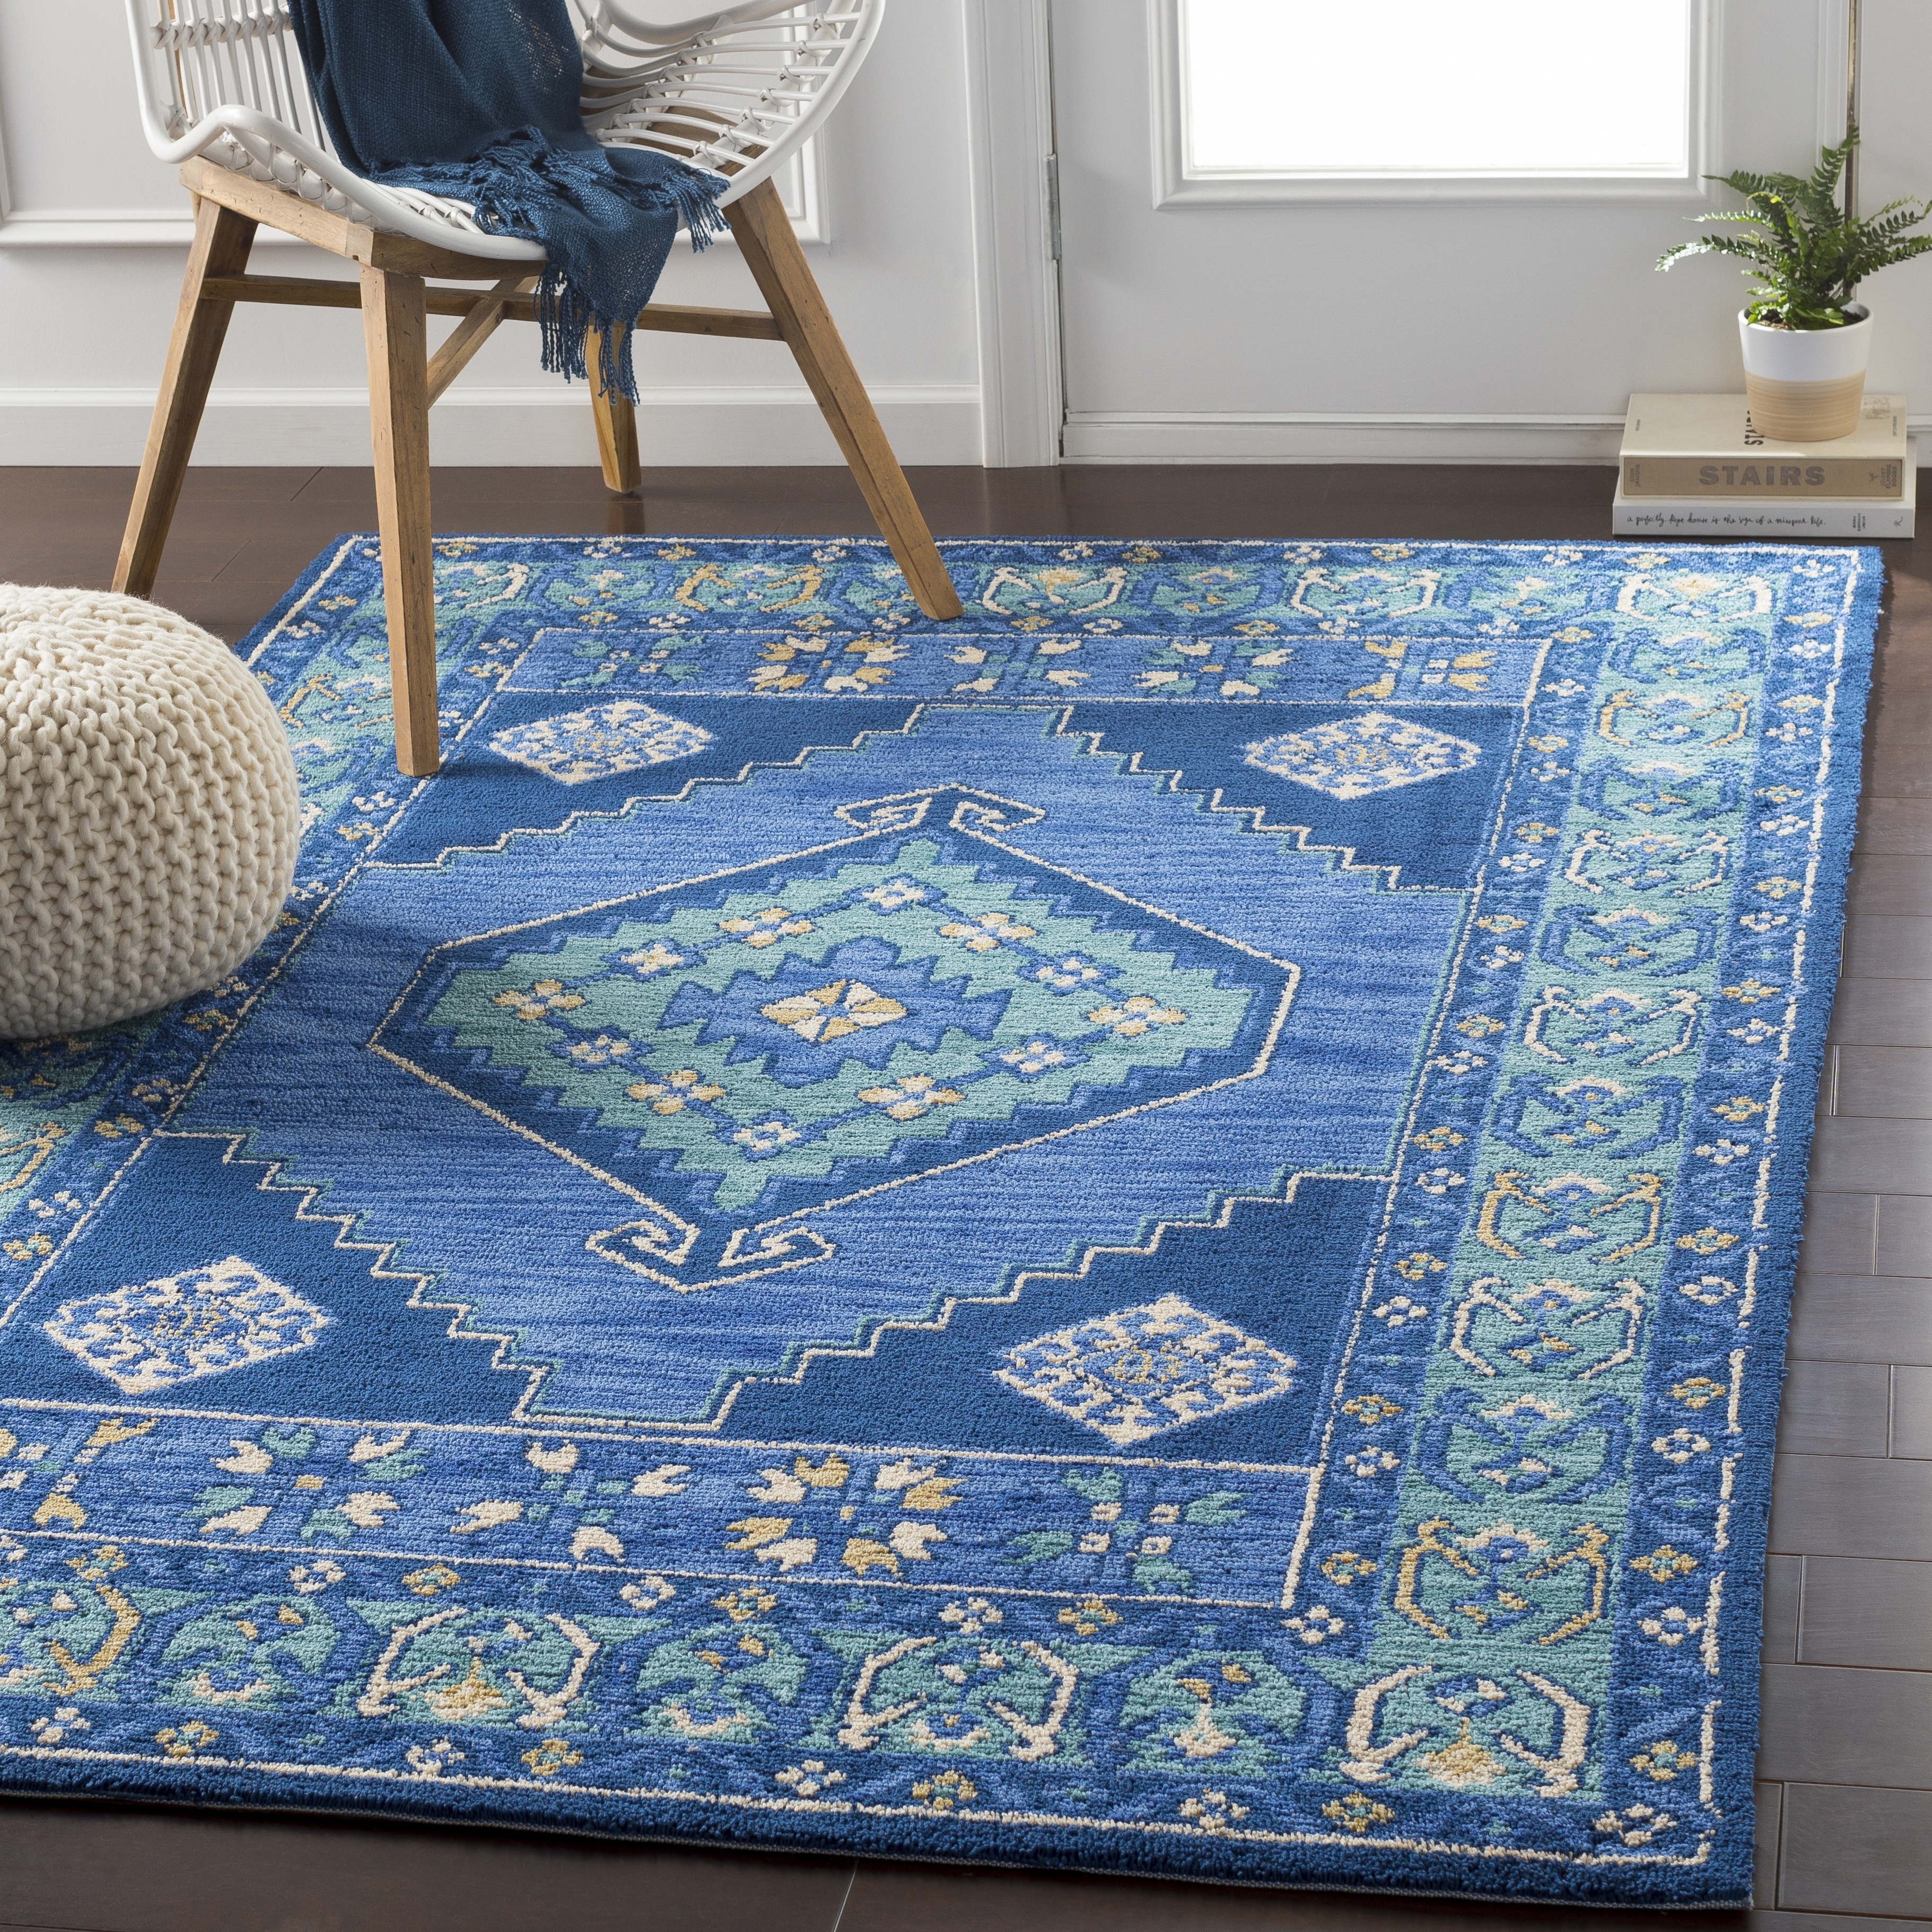 Jenica Rug, Navy and Teal 9' x 12' - Image 4